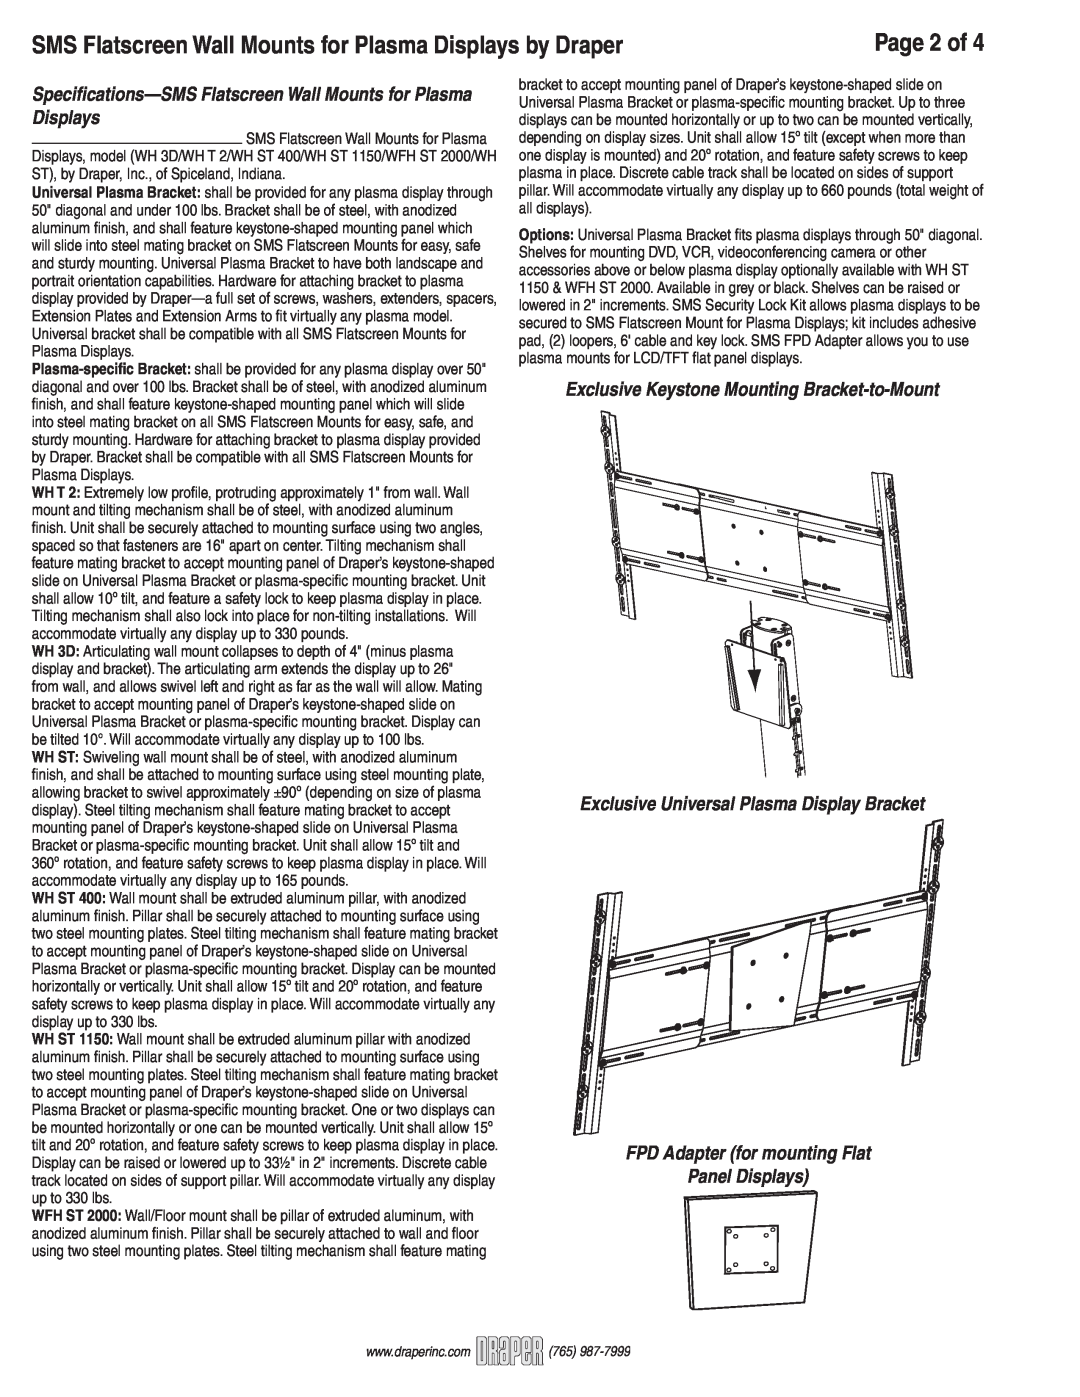 Draper WH ST, WH 3D Page 2 of, Exclusive Keystone Mounting Bracket-to-Mount, Exclusive Universal Plasma Display Bracket 